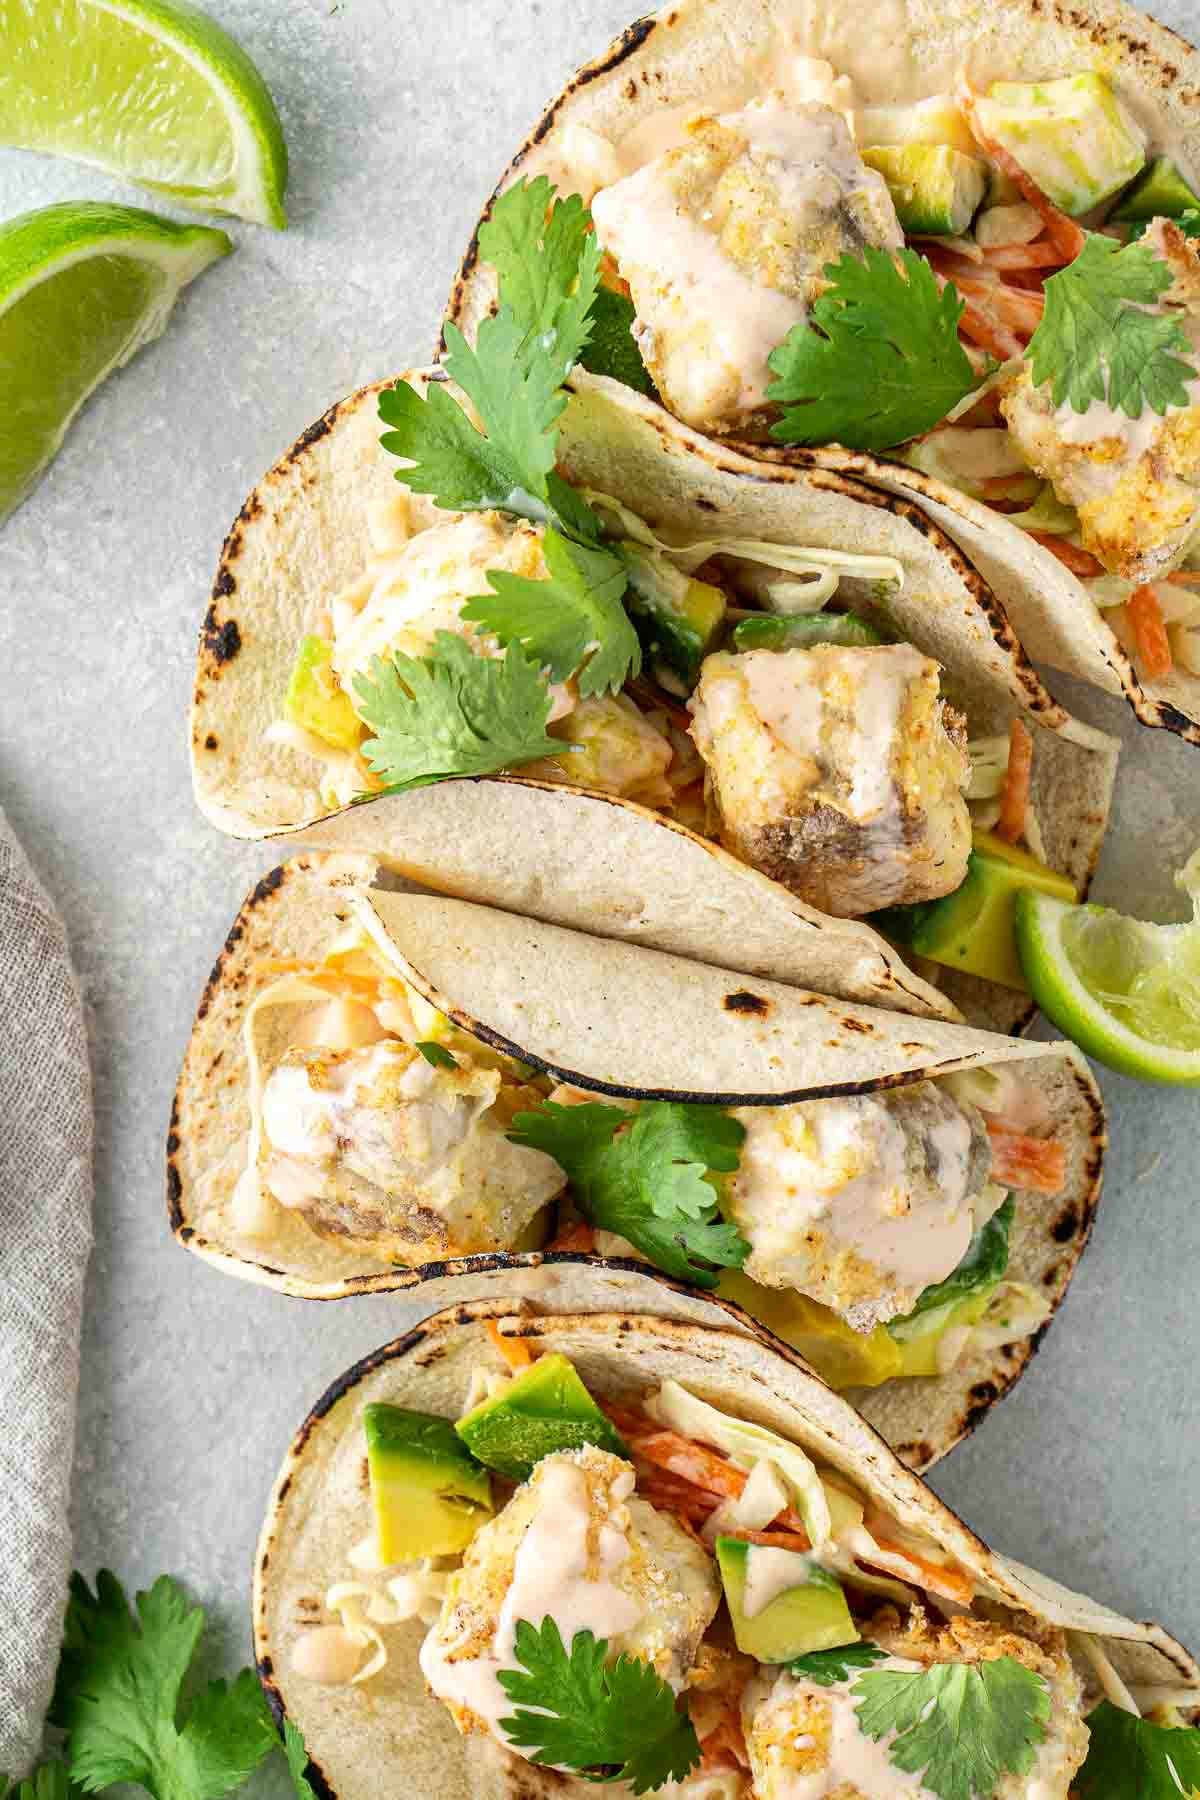 Gluten free fish taco with coriander and lime.